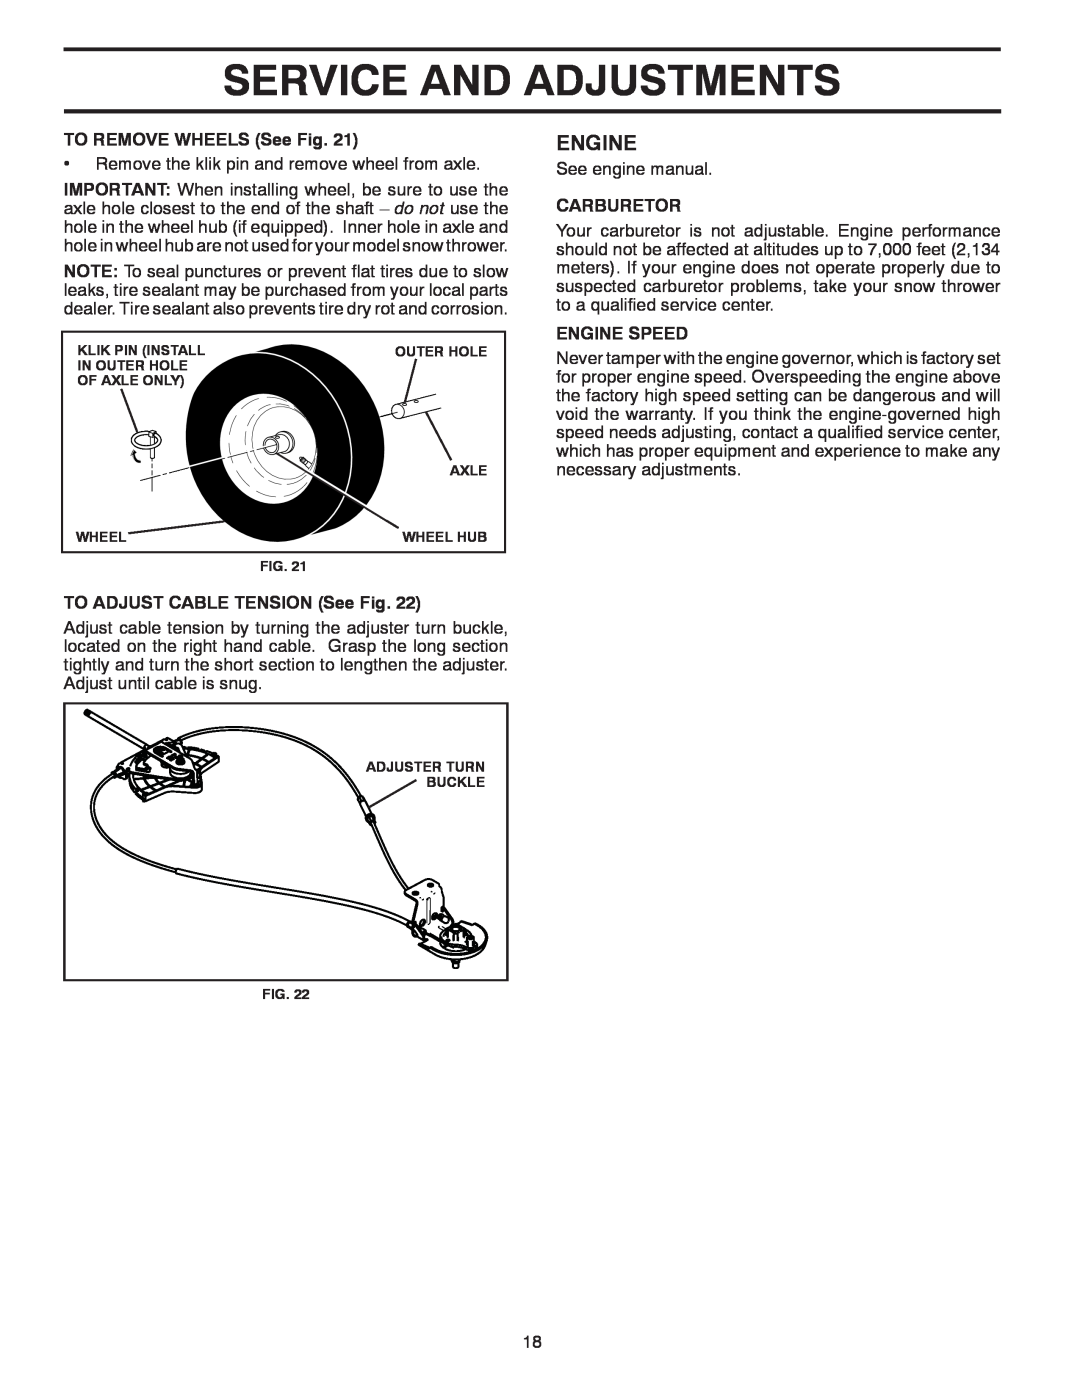 Poulan 428695 Service And Adjustments, Engine, TO REMOVE WHEELS See Fig, TO ADJUST CABLE TENSION See Fig, Carburetor 